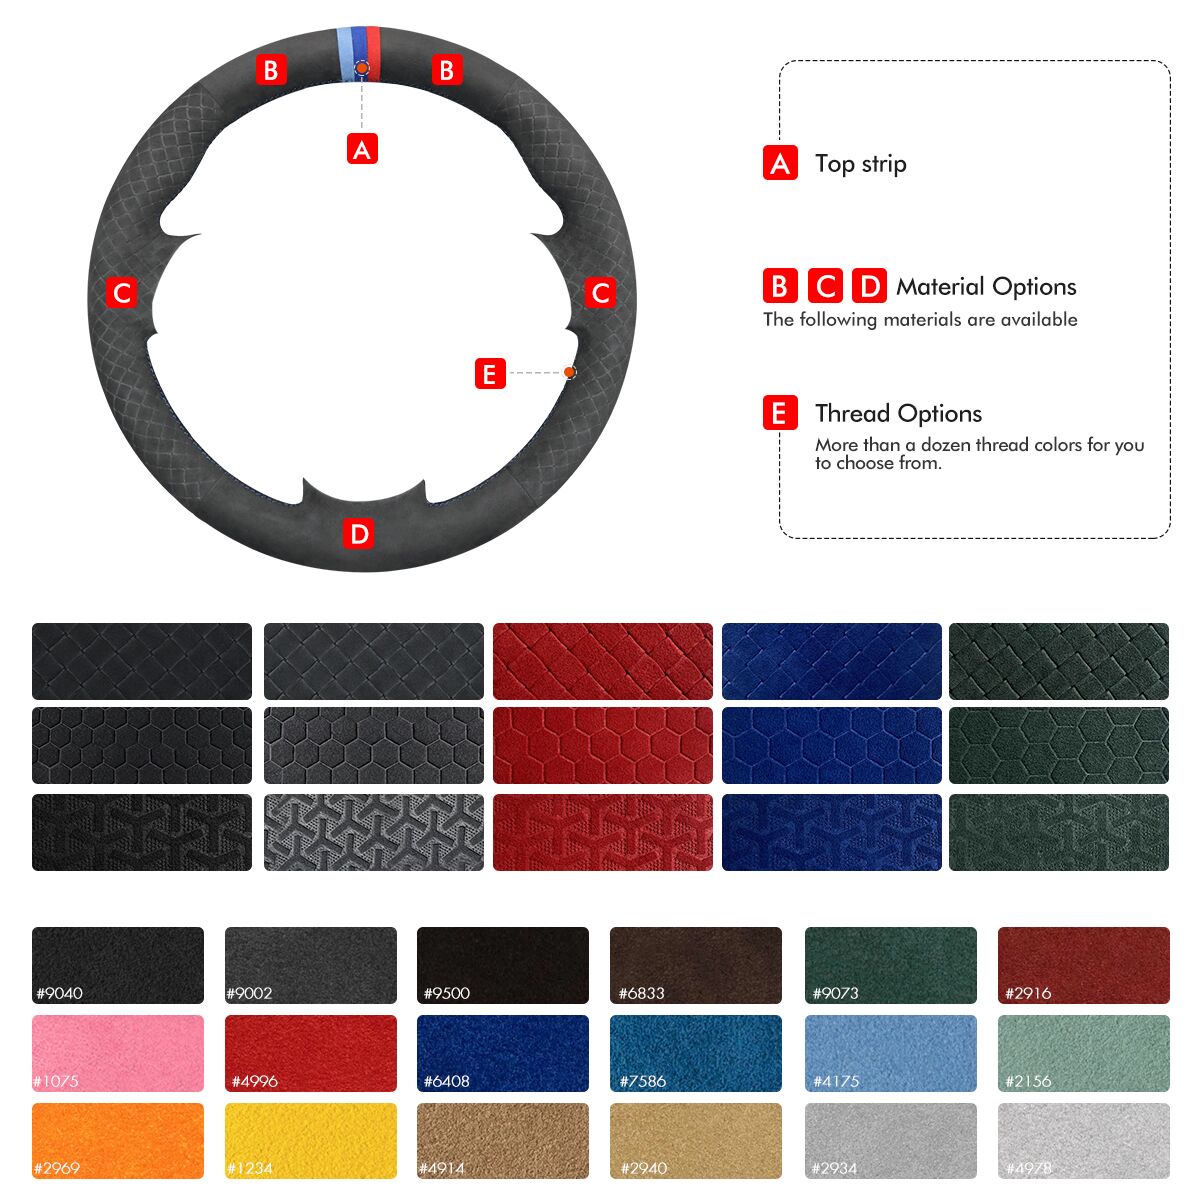 MEWANT Black Leather Suede Car Steering Wheel Cover for Honda Accord 8 2008-2013 / Pilot 2019-2015 / Odyssey 2011-2017